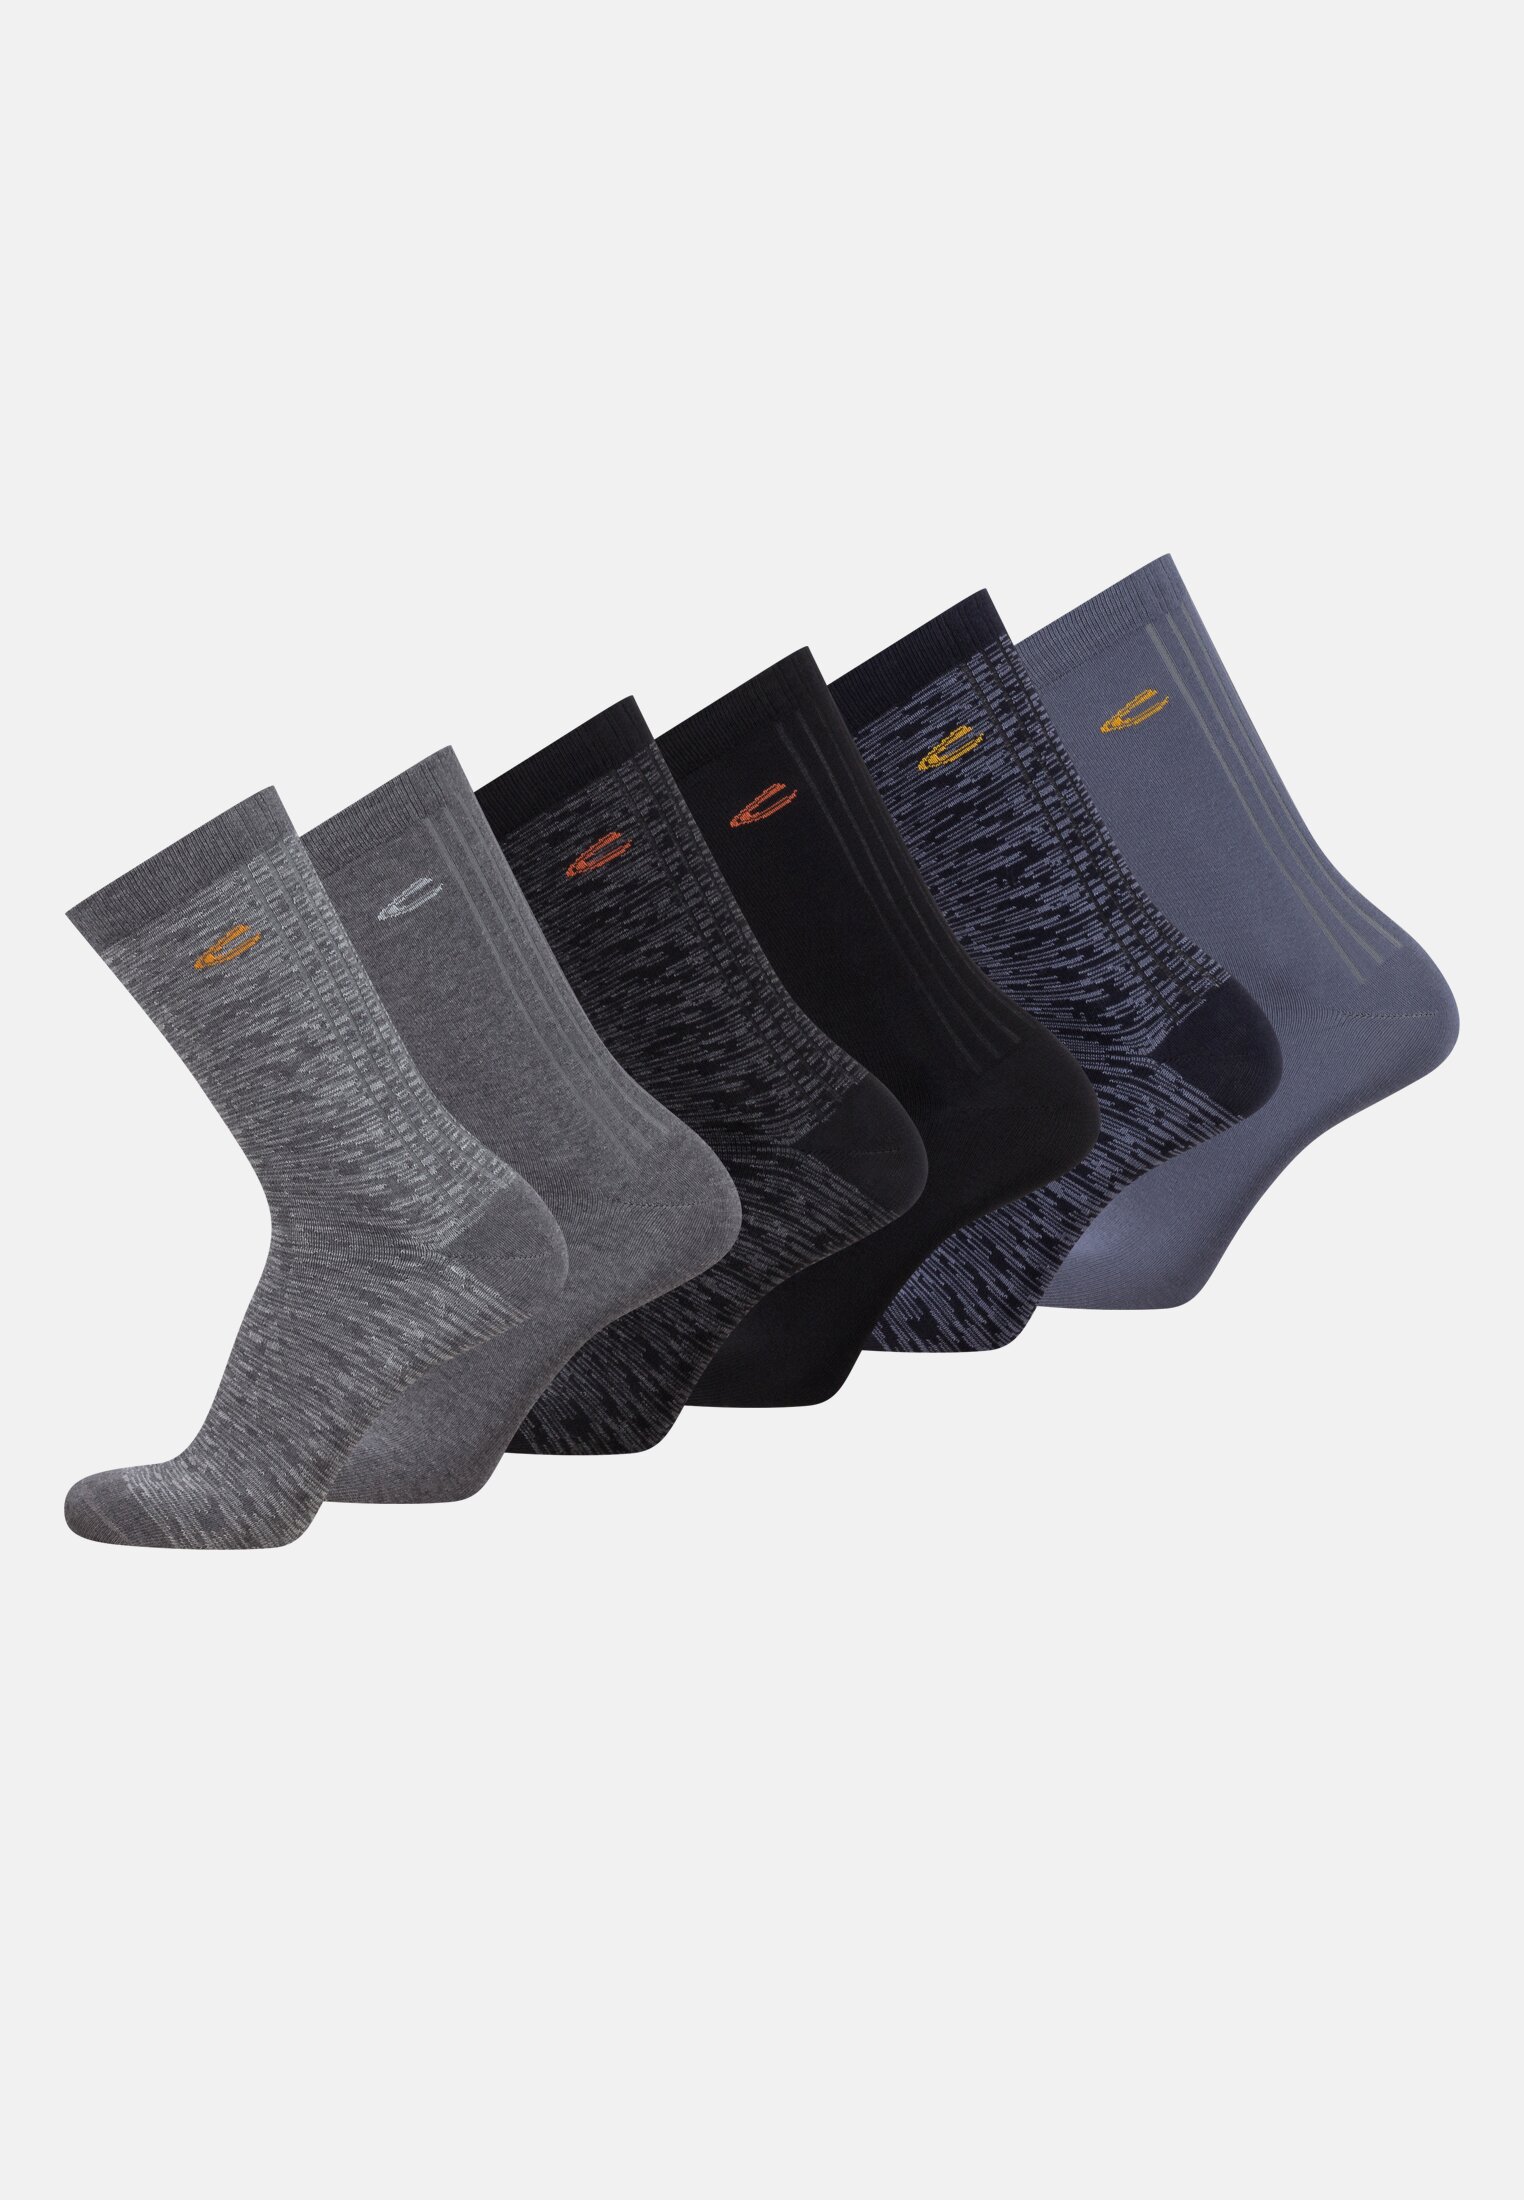 Camel Active Socks in a 6-pack